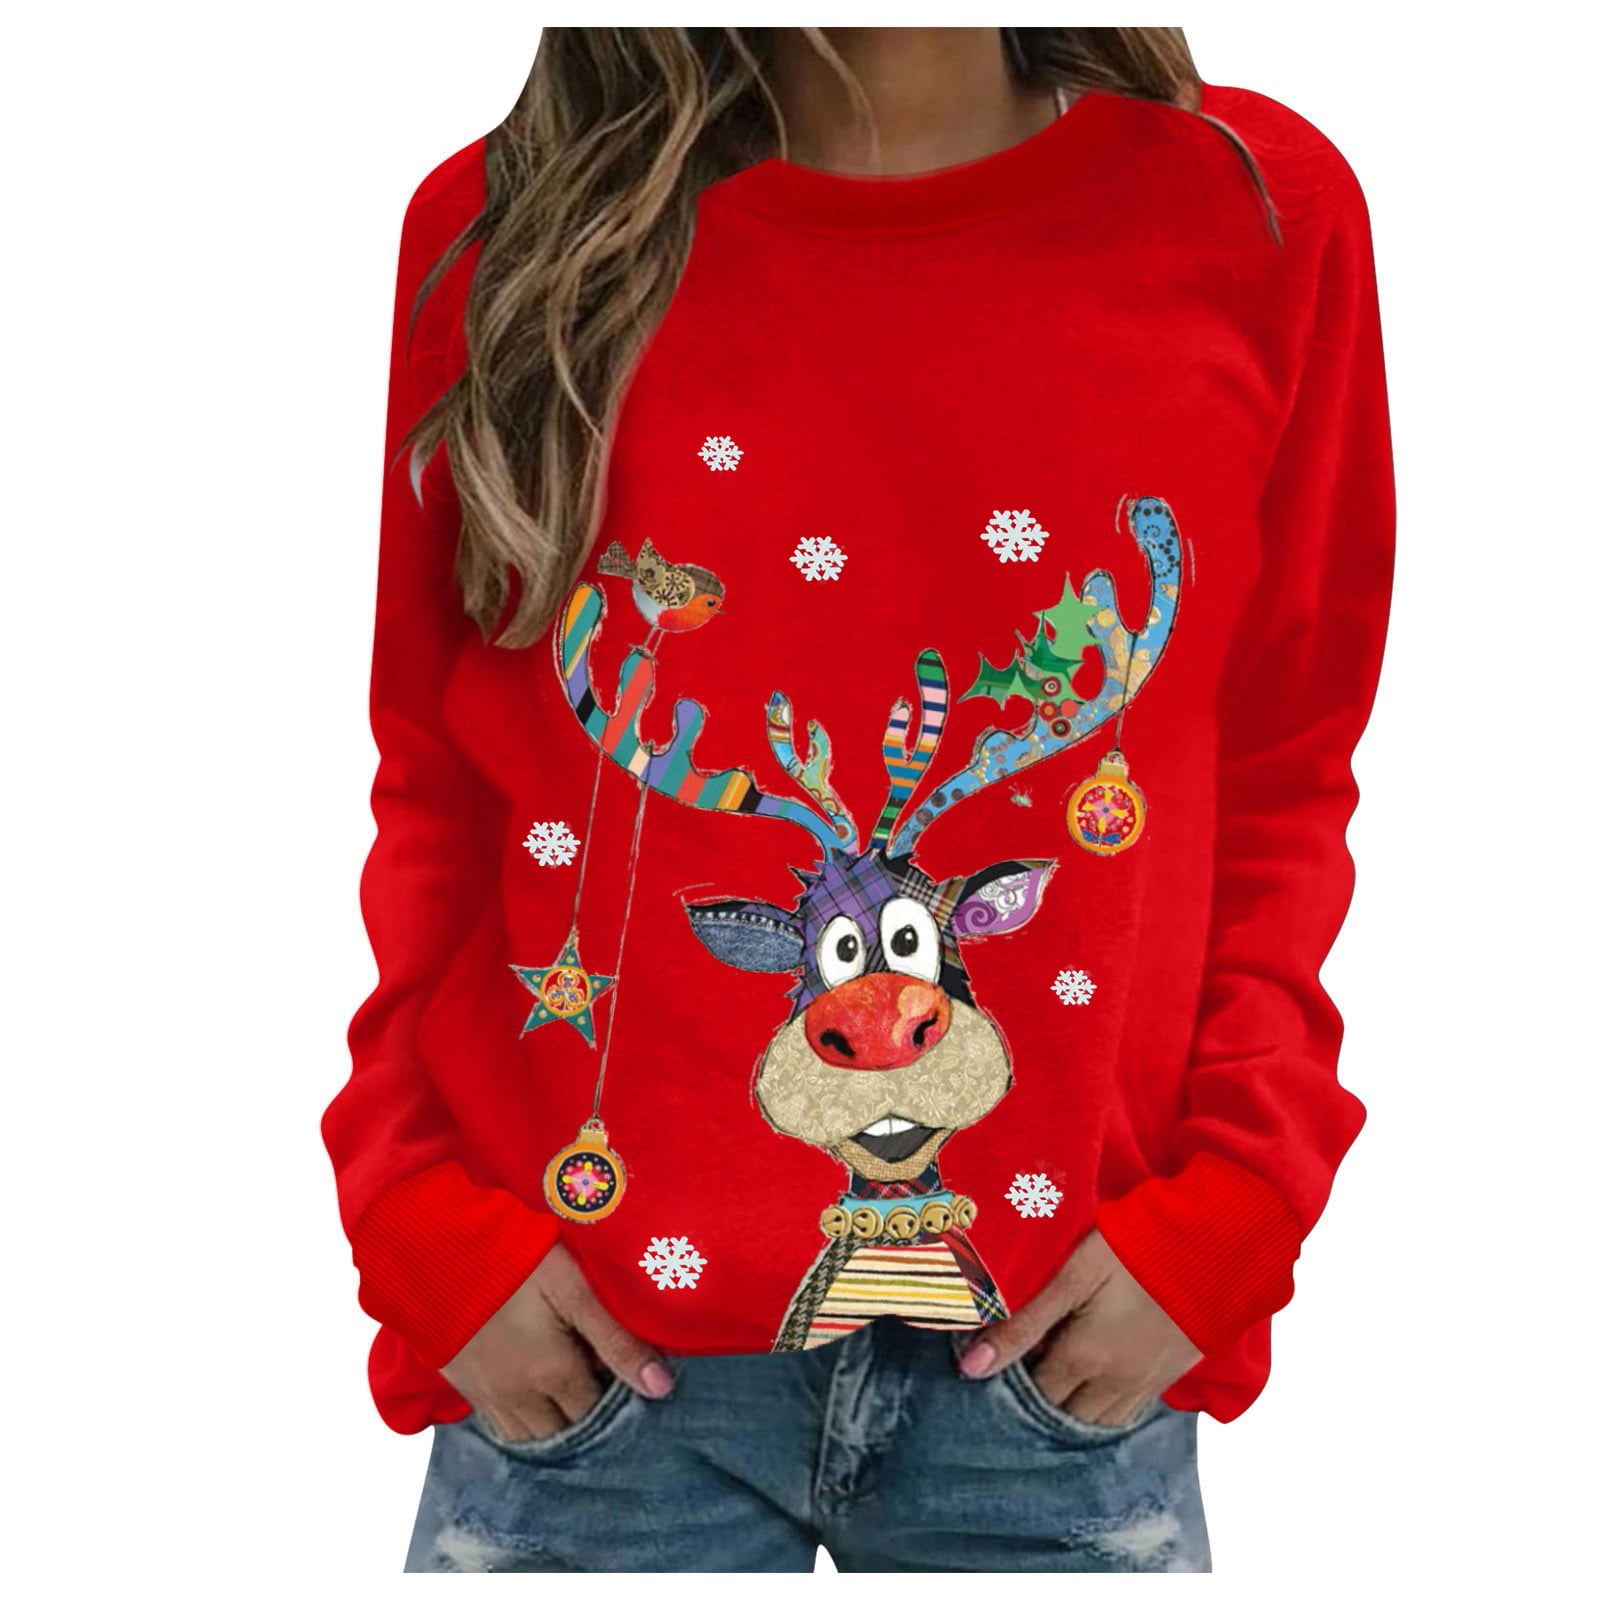 hxshgdsn Christmas Tree Pullover Tops for Women Crew Neck Long Sleeve Casual Loose Sweatshirts Cute Festivals Gifts for Ladies(Orange,XXXL), Women's